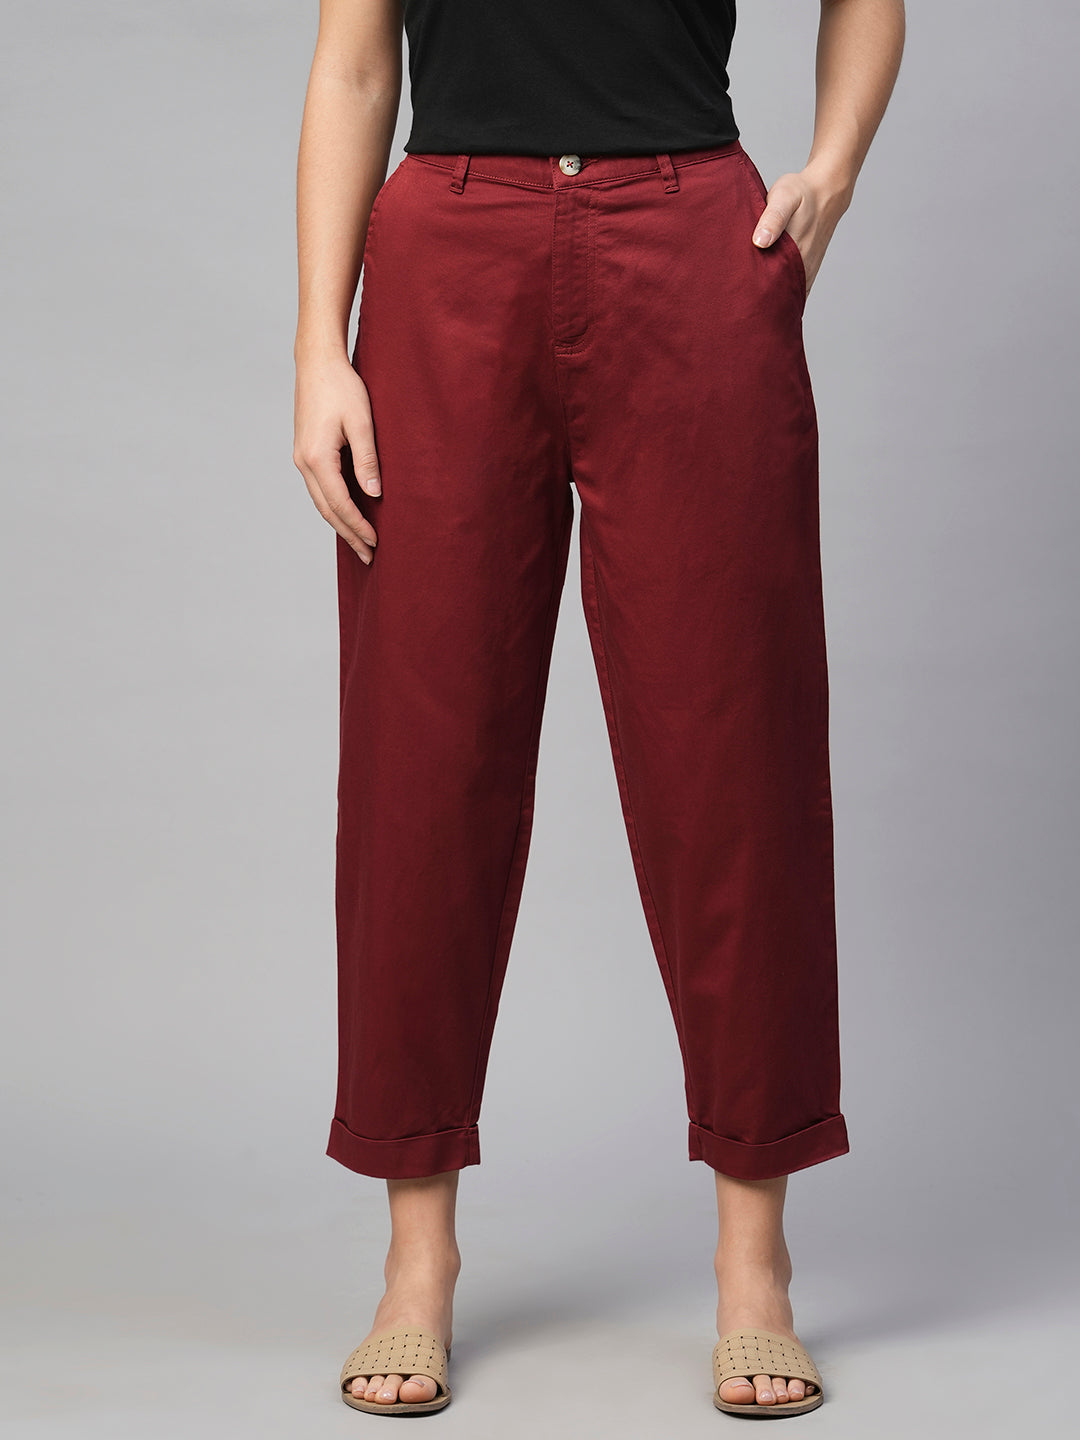 Women's Cotton Elastane Maroon/Red Loose Fit Pant